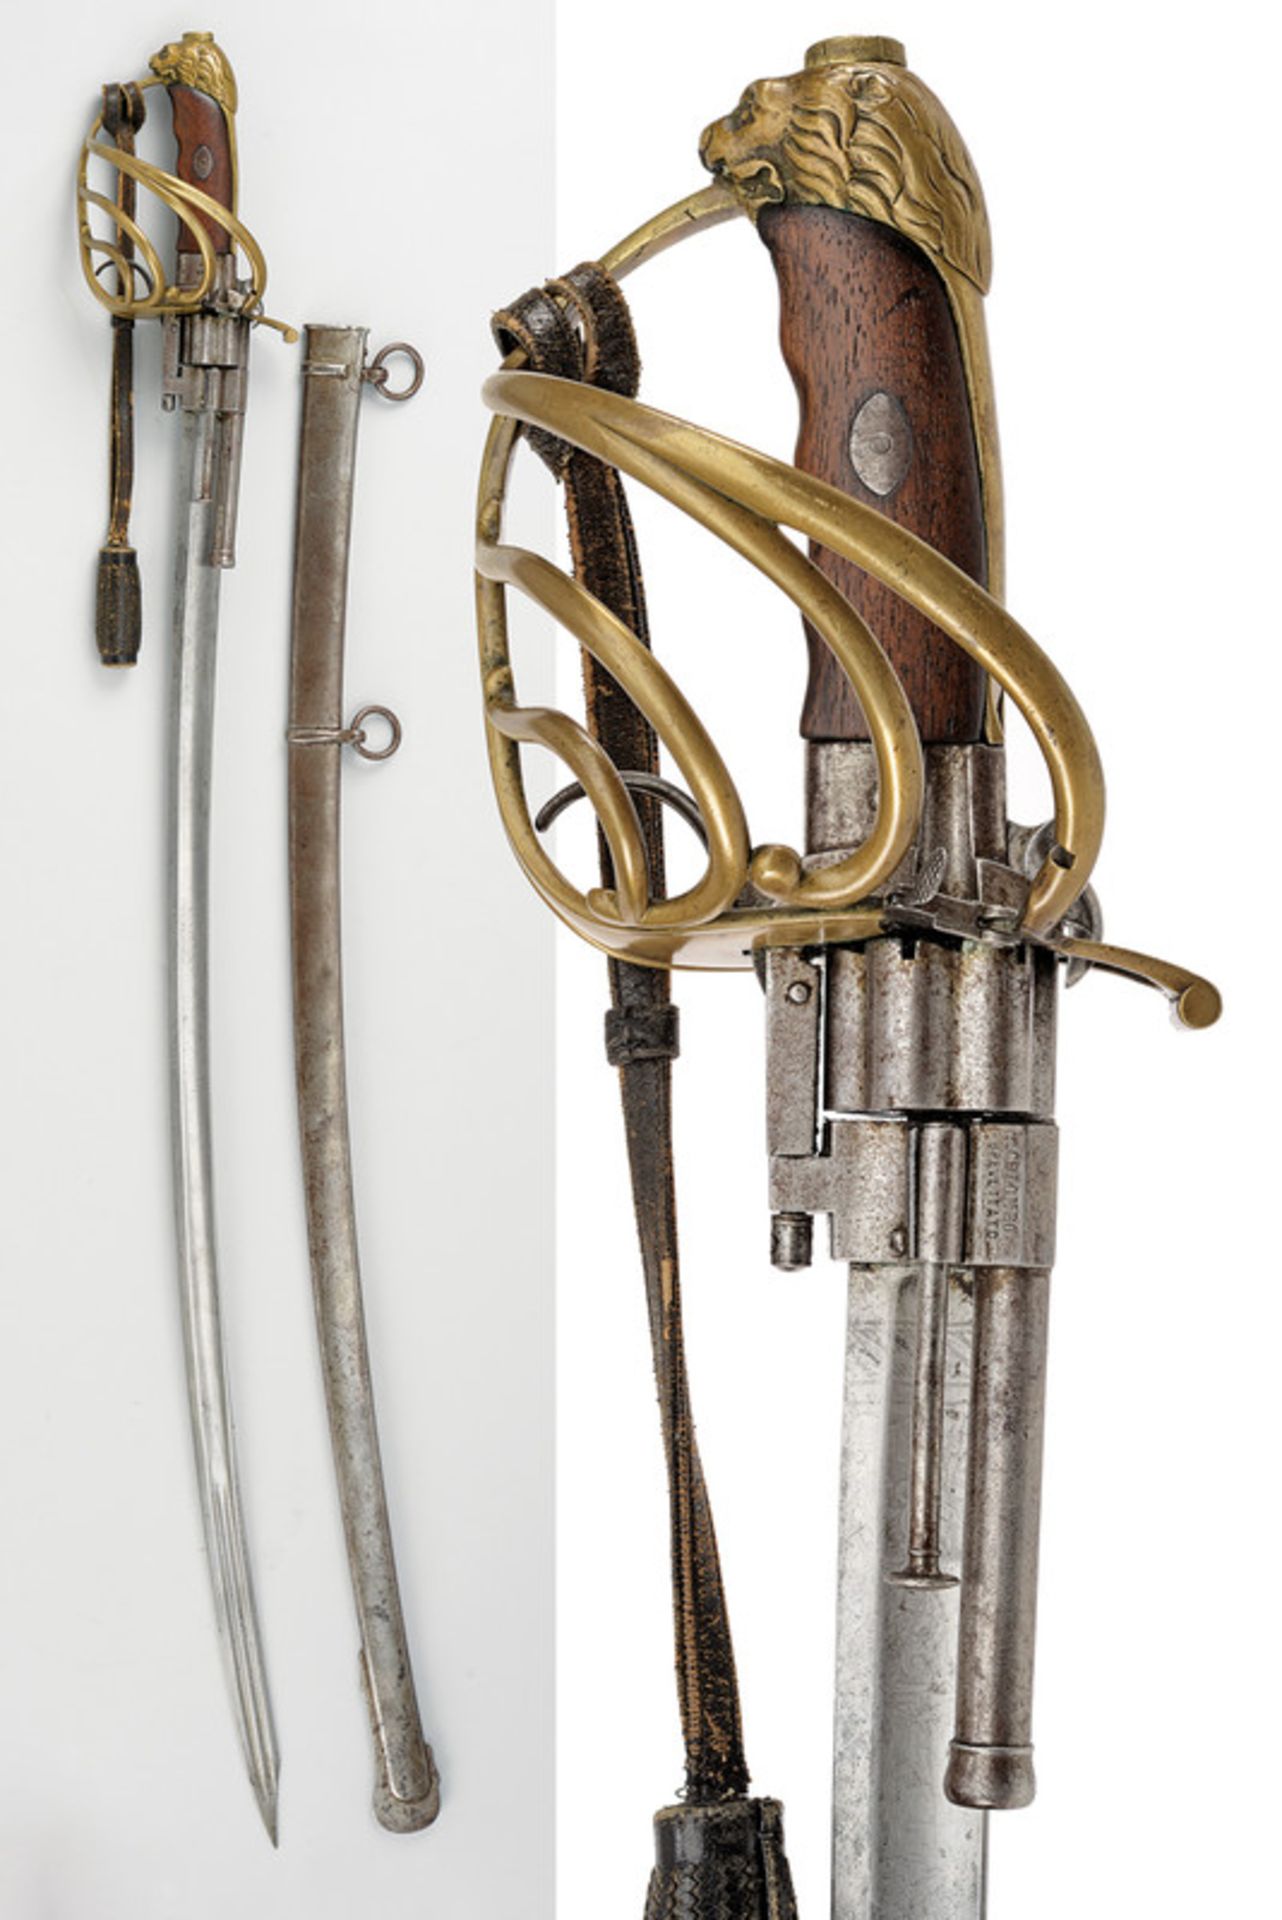 A 1864 model cavalry revolver sabre by Colombo dating: third quarter of the 19th Century provenance: